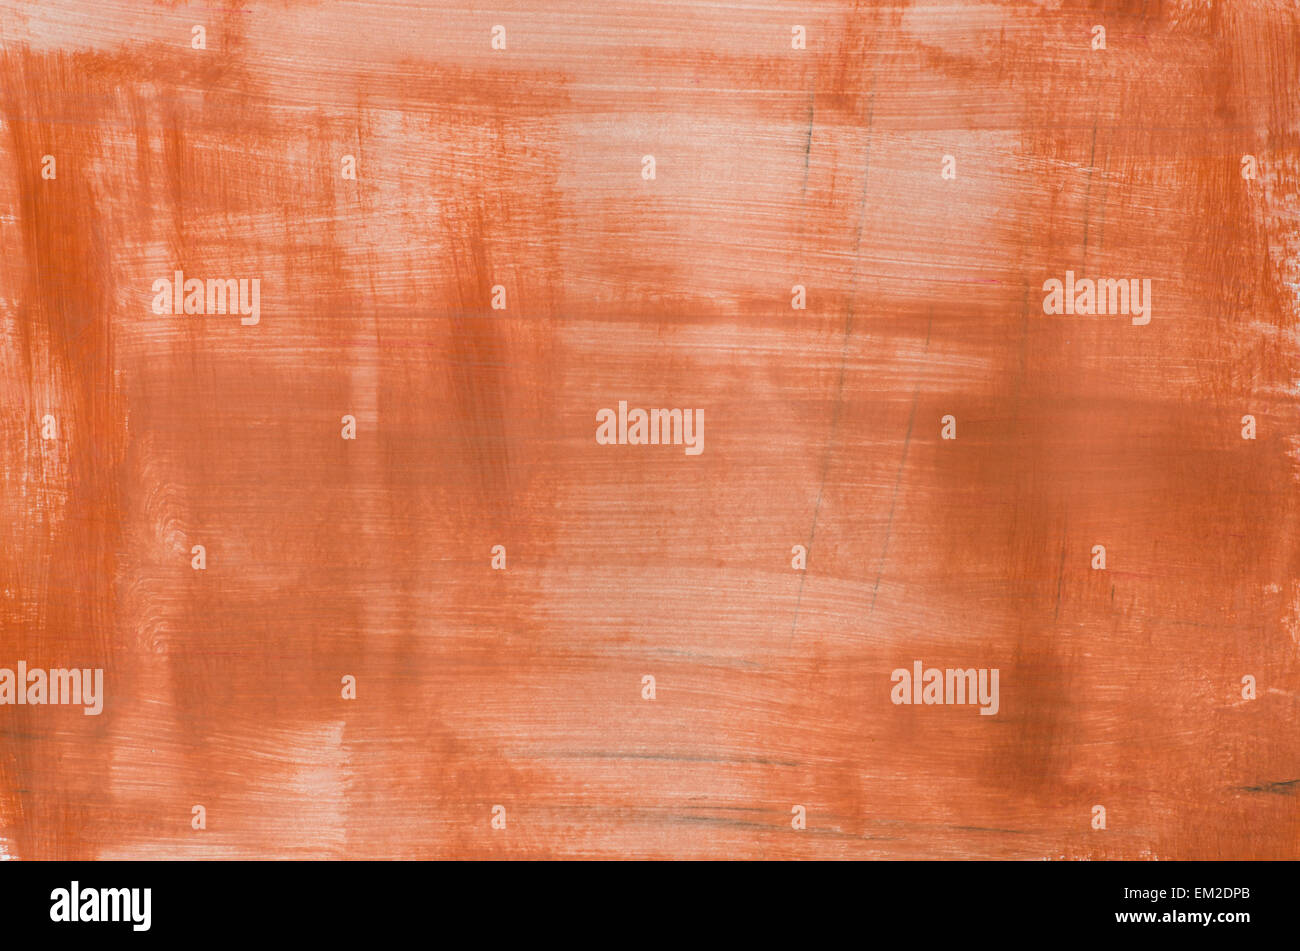 art abstract brown painted texture Stock Photo